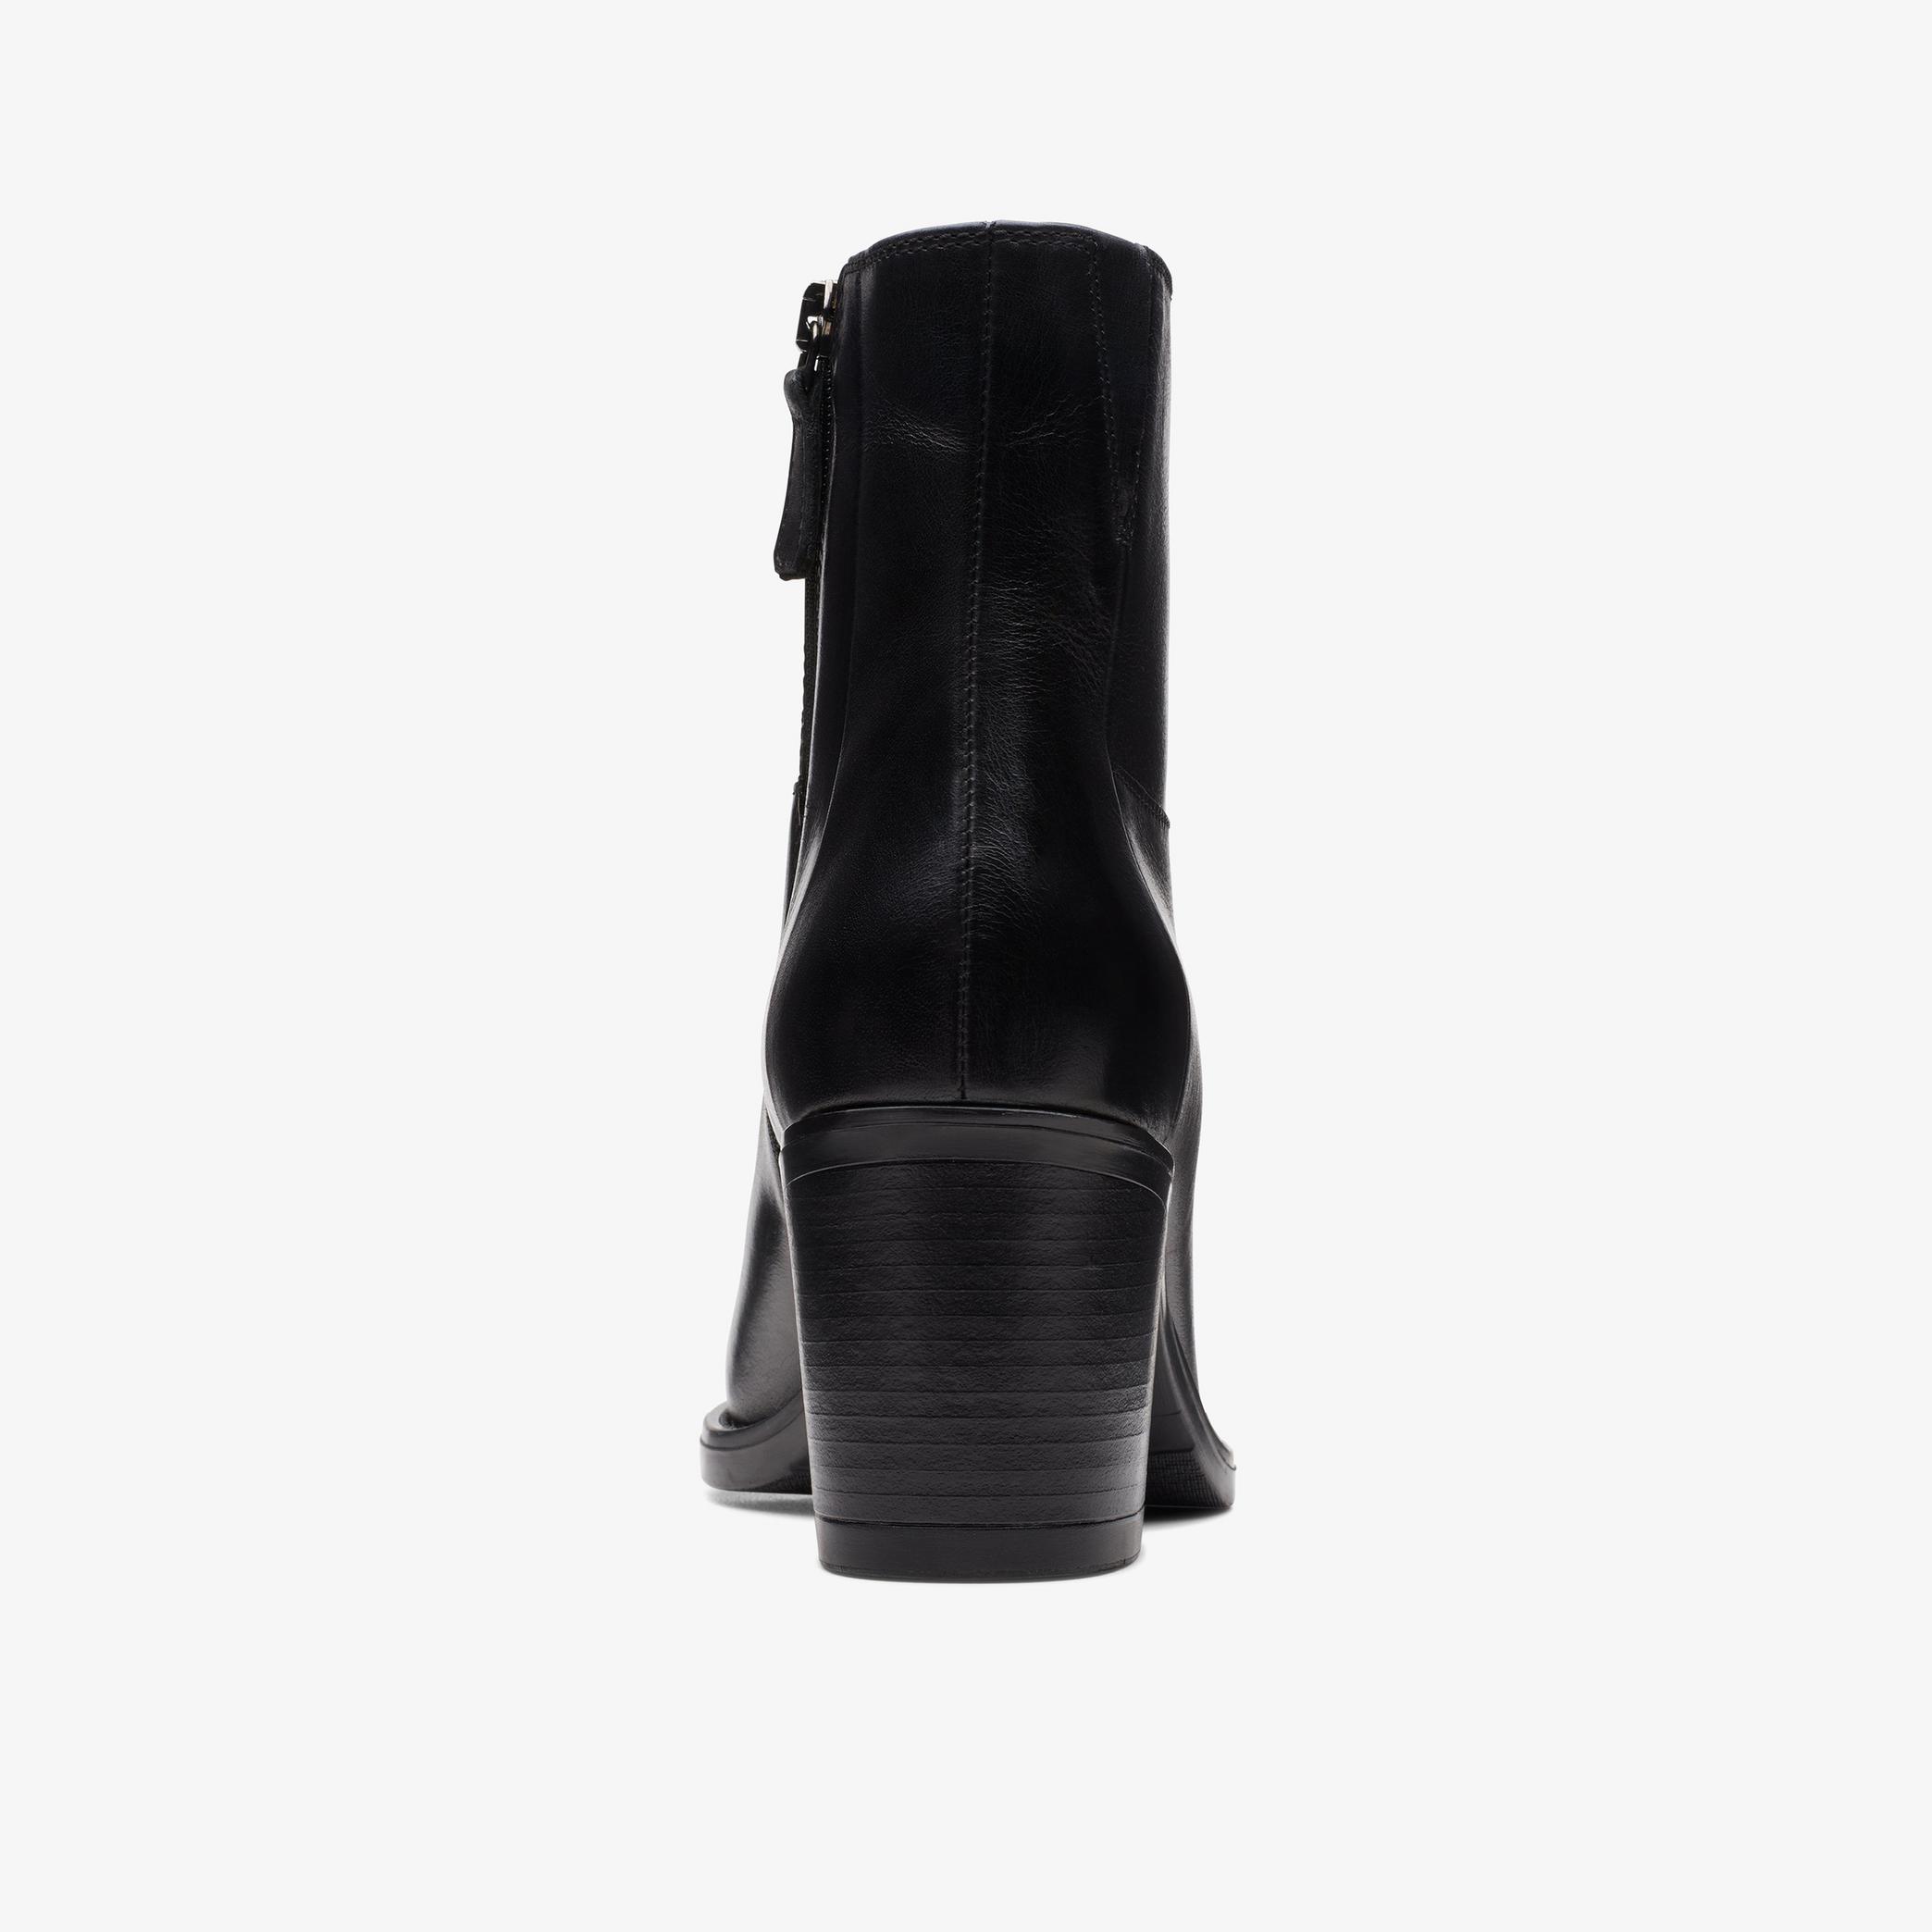 Mascarpone2 Go Black Leather Boots, view 5 of 6